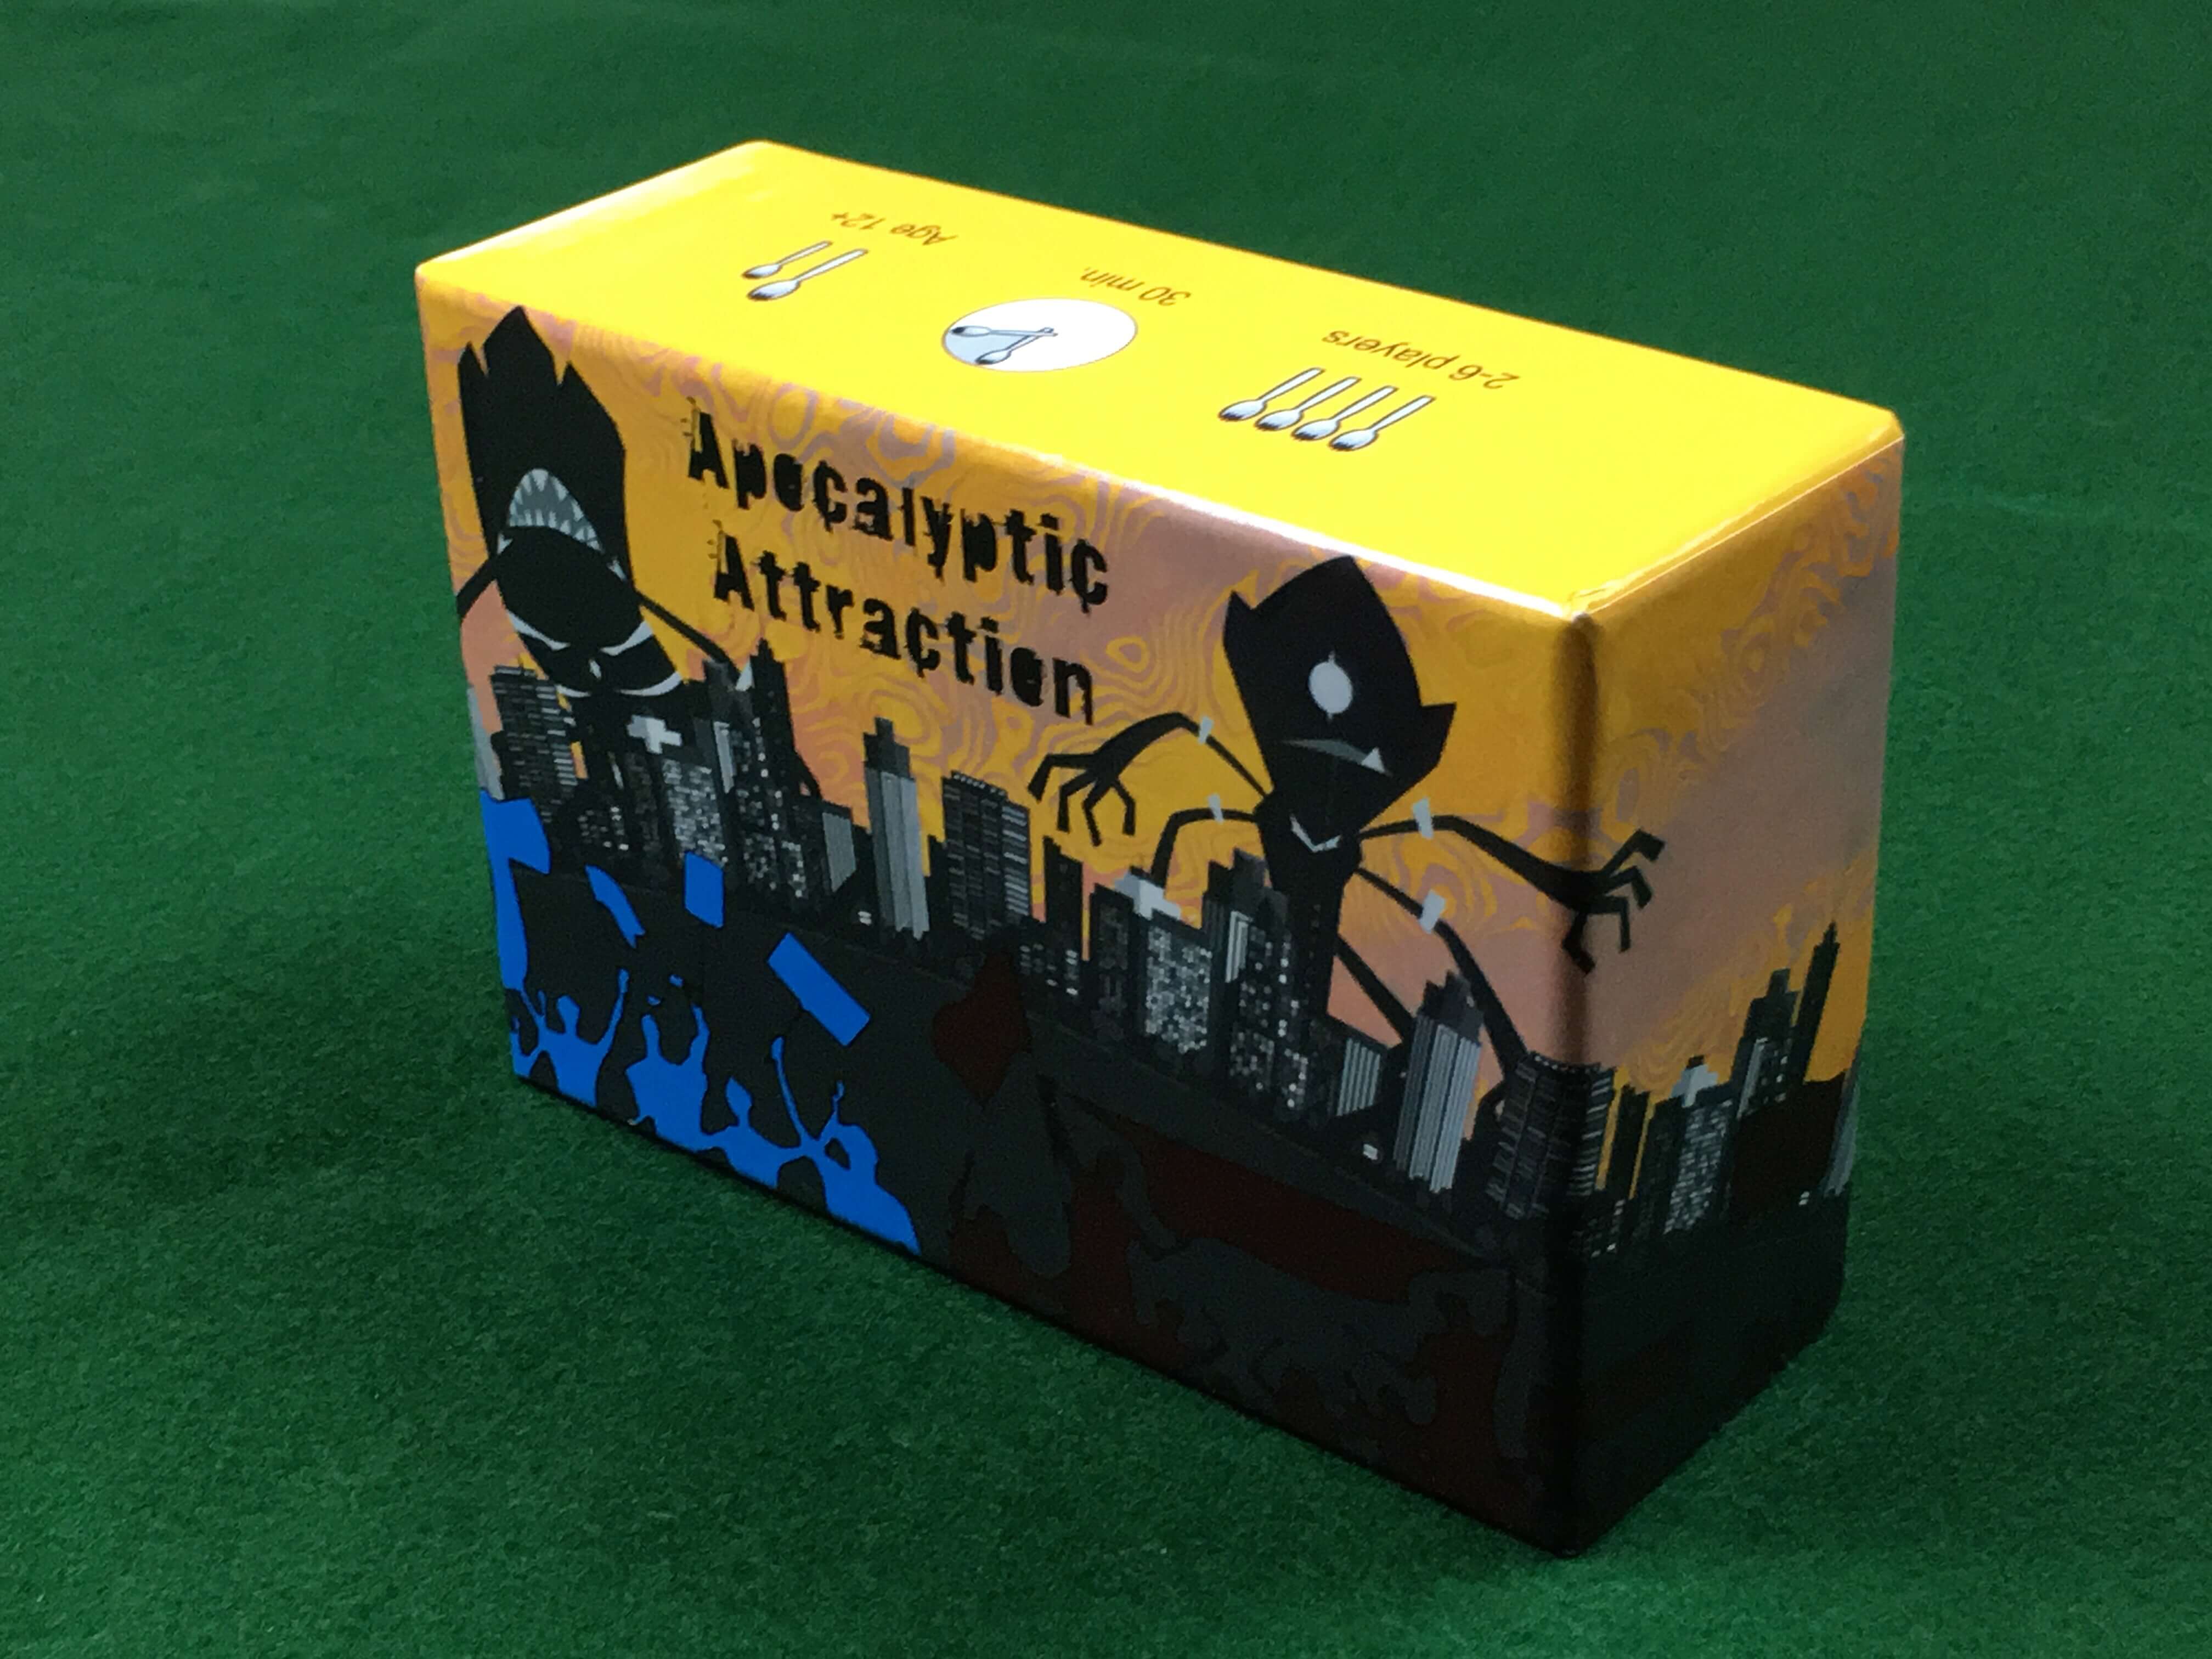 apocalyptic attraction box sitting upright